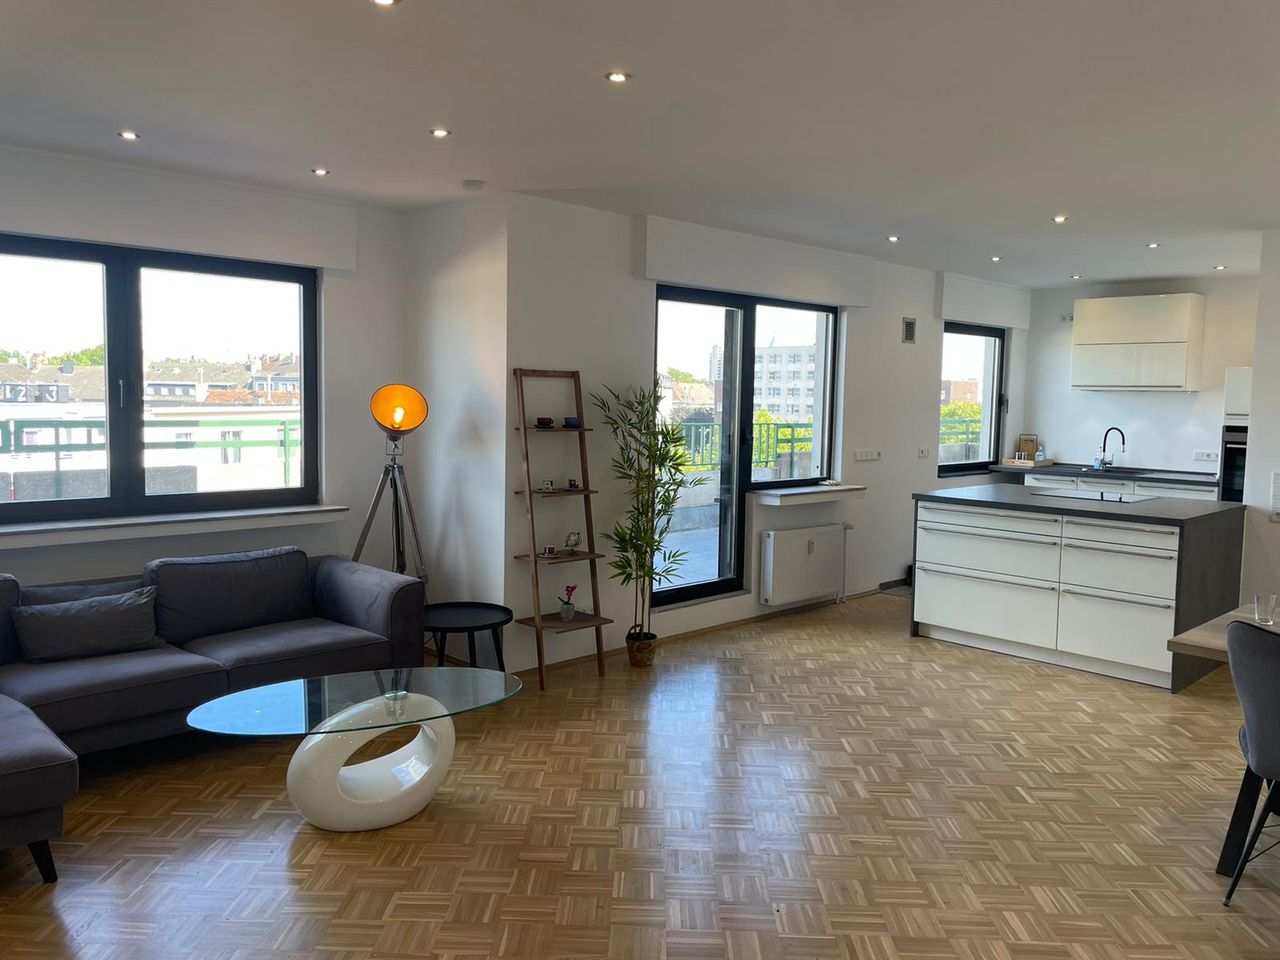 Furnished apartments, lofts and studios in Dortmund